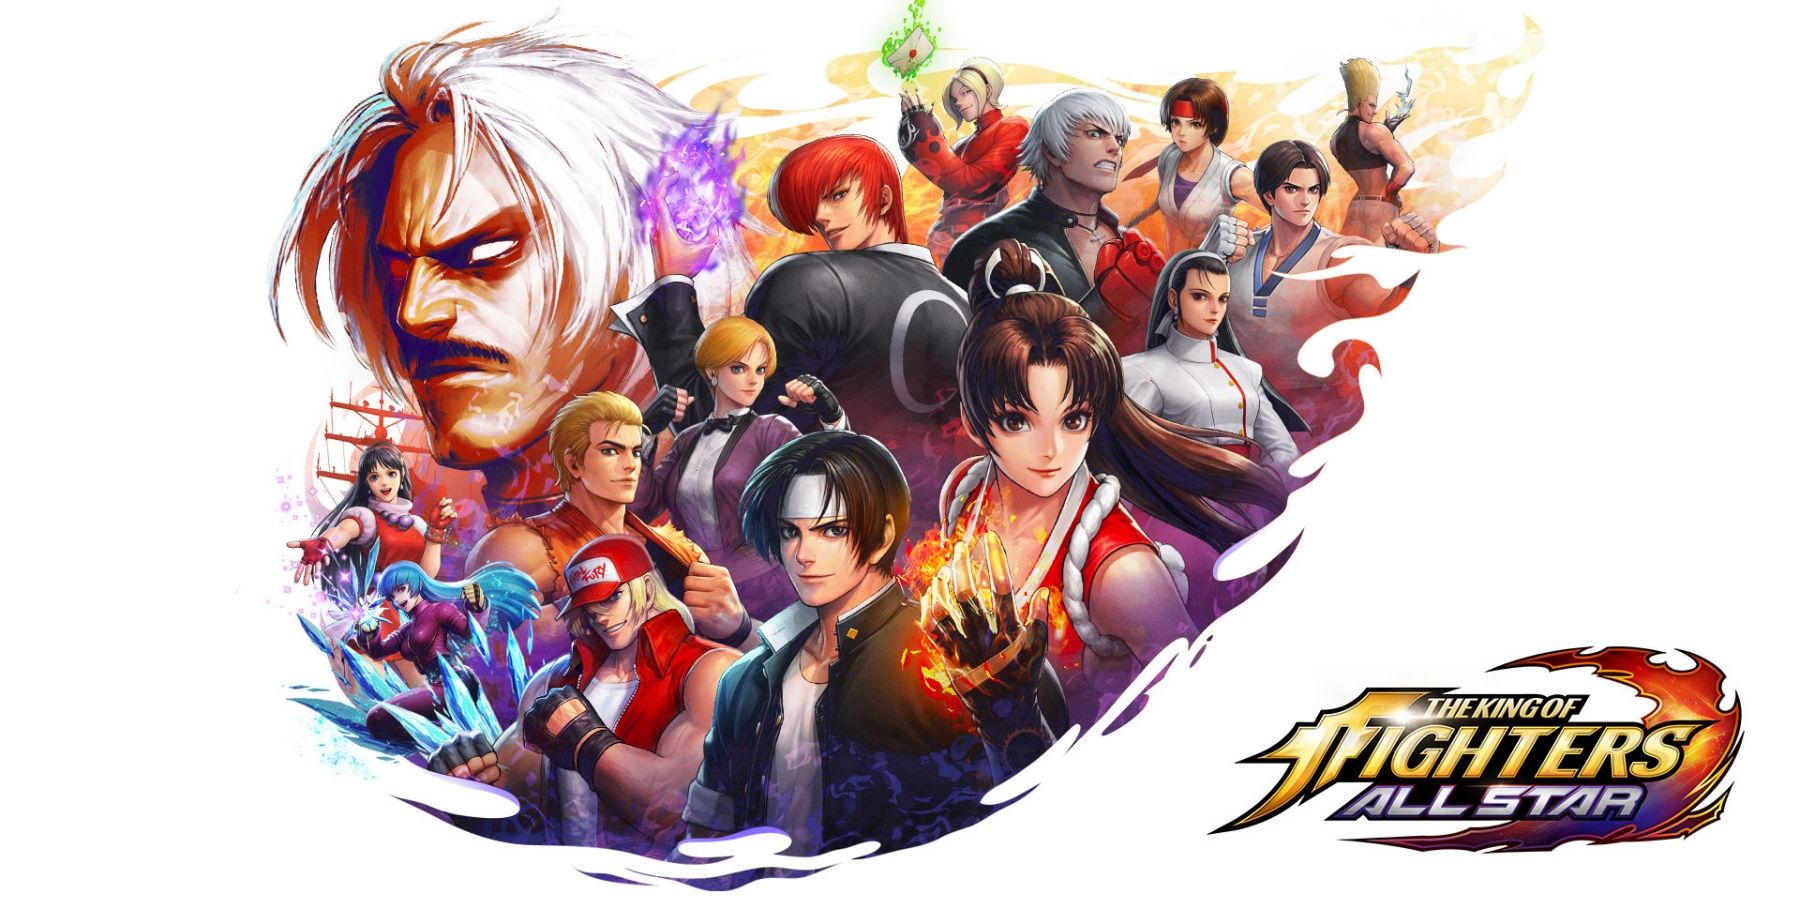 the king of fighters allstar - official keyart with characters